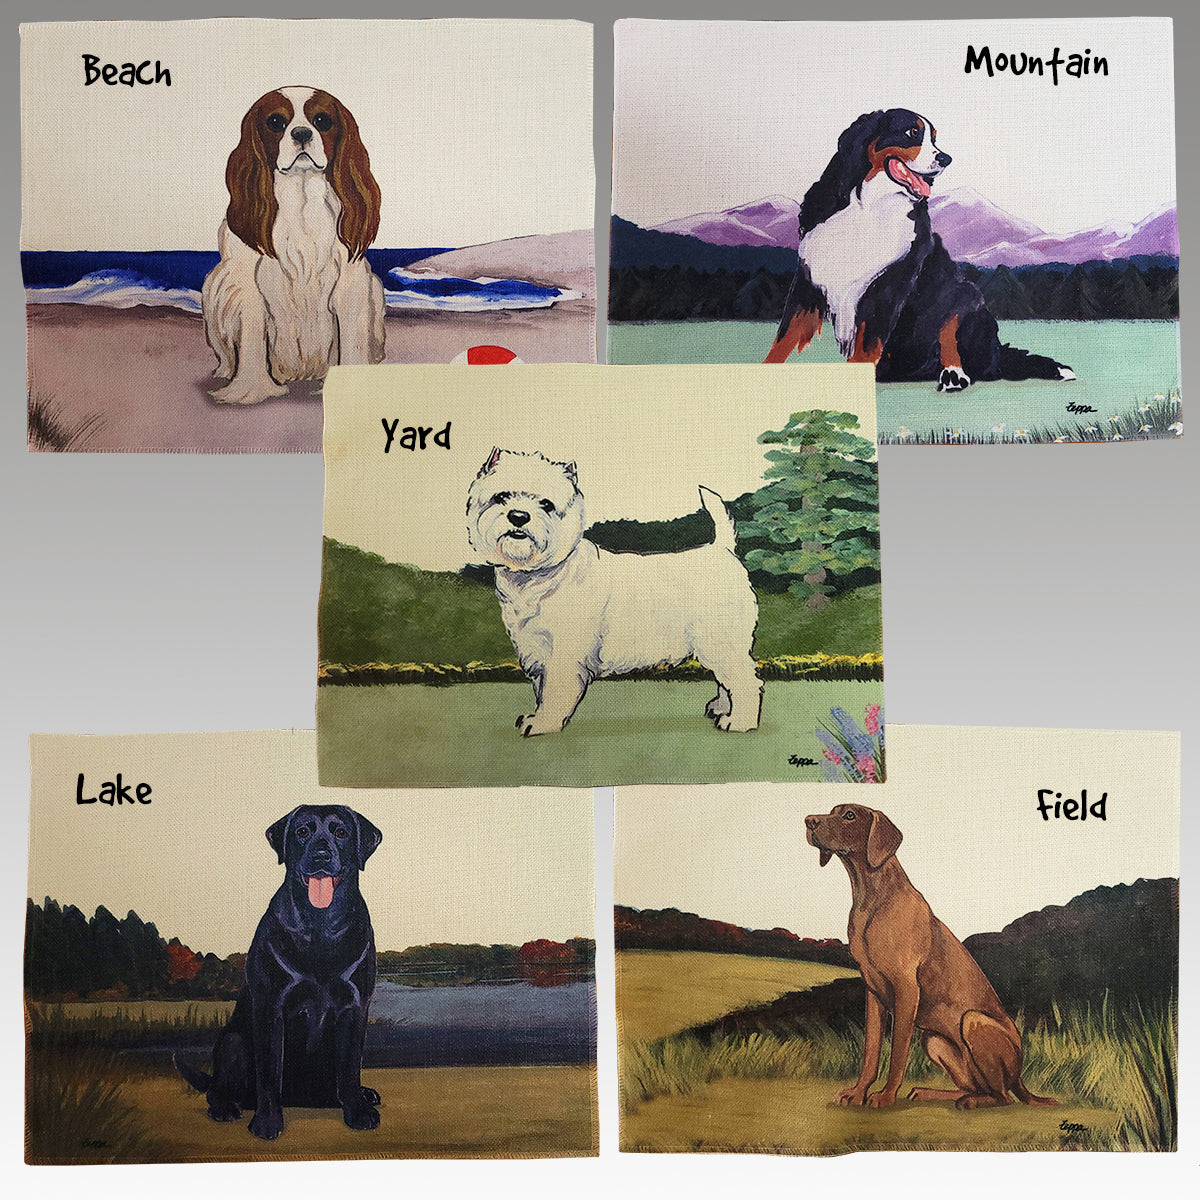 Jack Russell Terrier Scenic Placemats